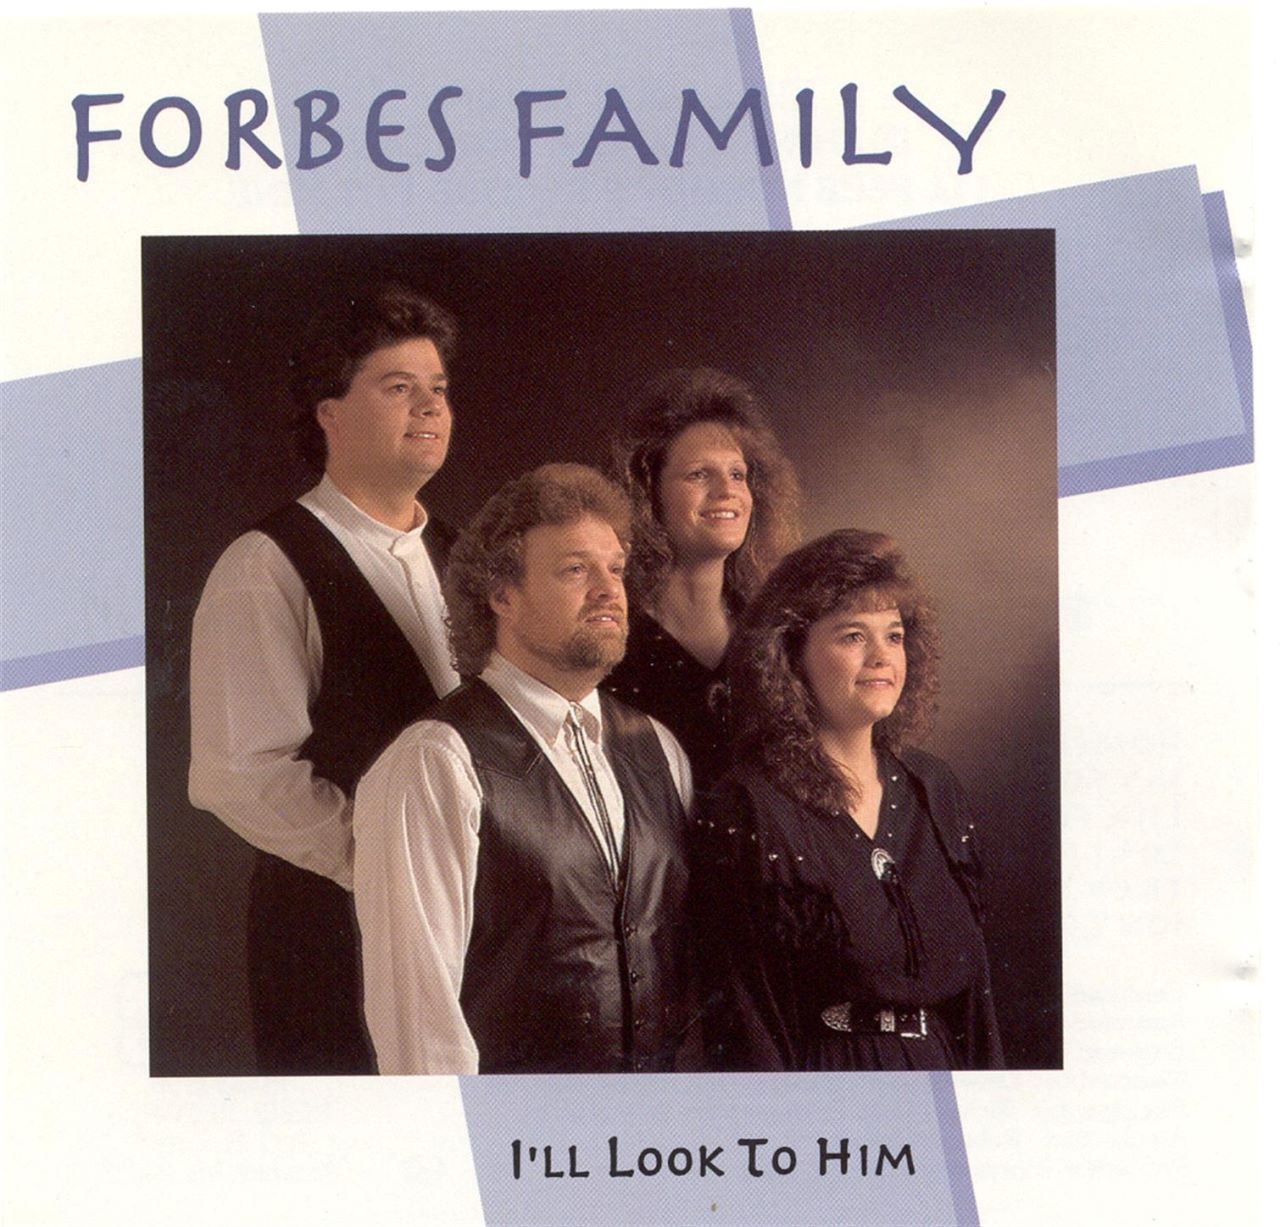 Forbes Family - I'll Look To Him cover album